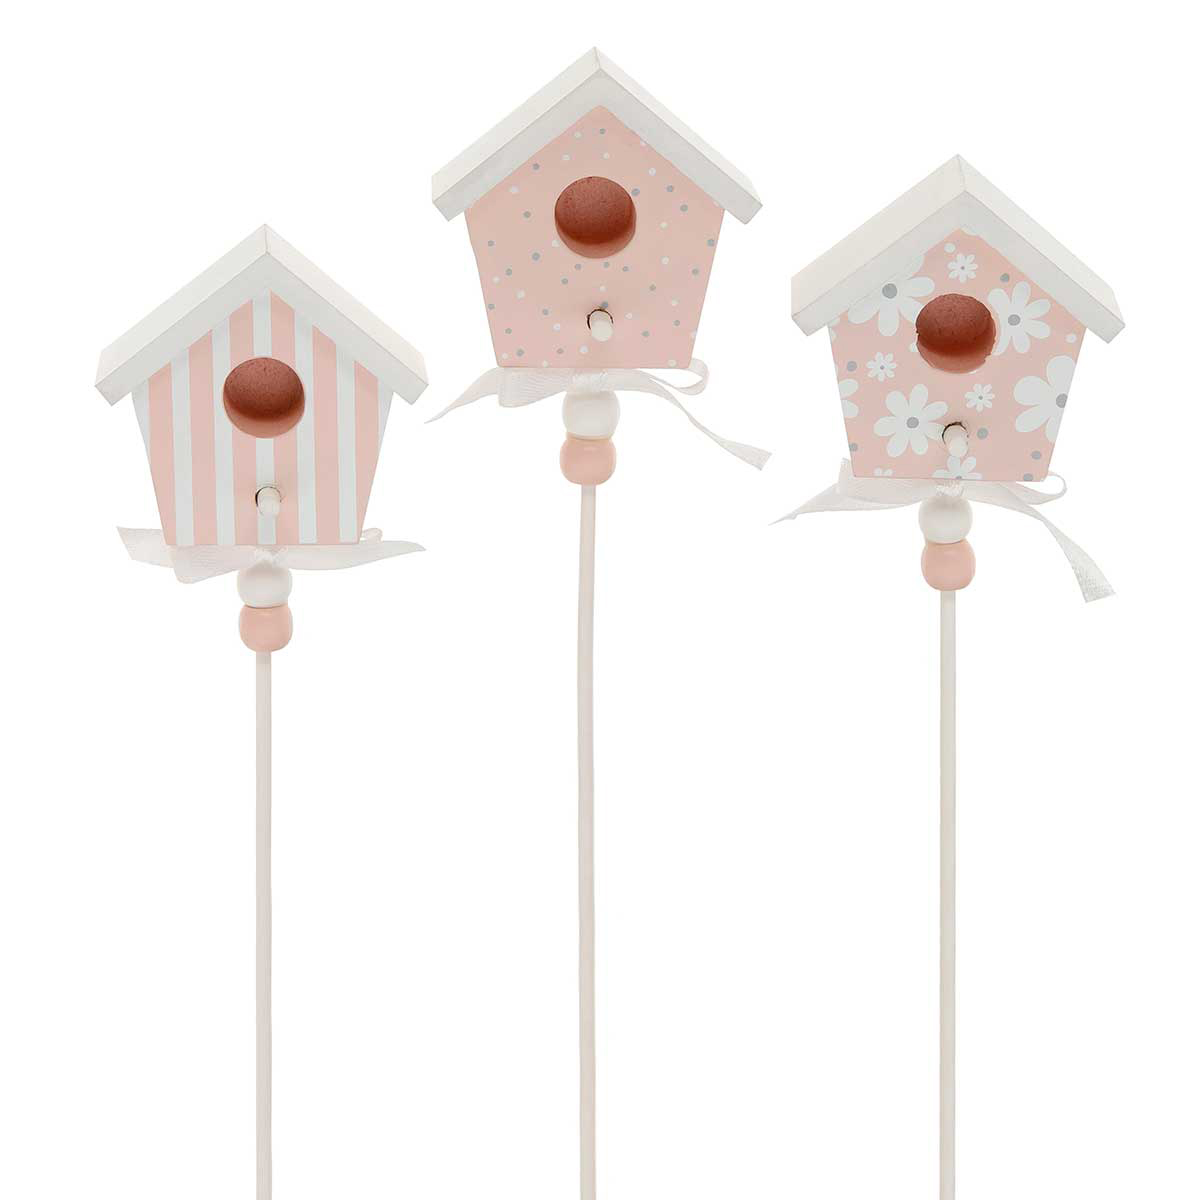 WHOOPSIE MINI WOOD BIRDHOUSE ON STICK PINK/WHITE WITH BOW